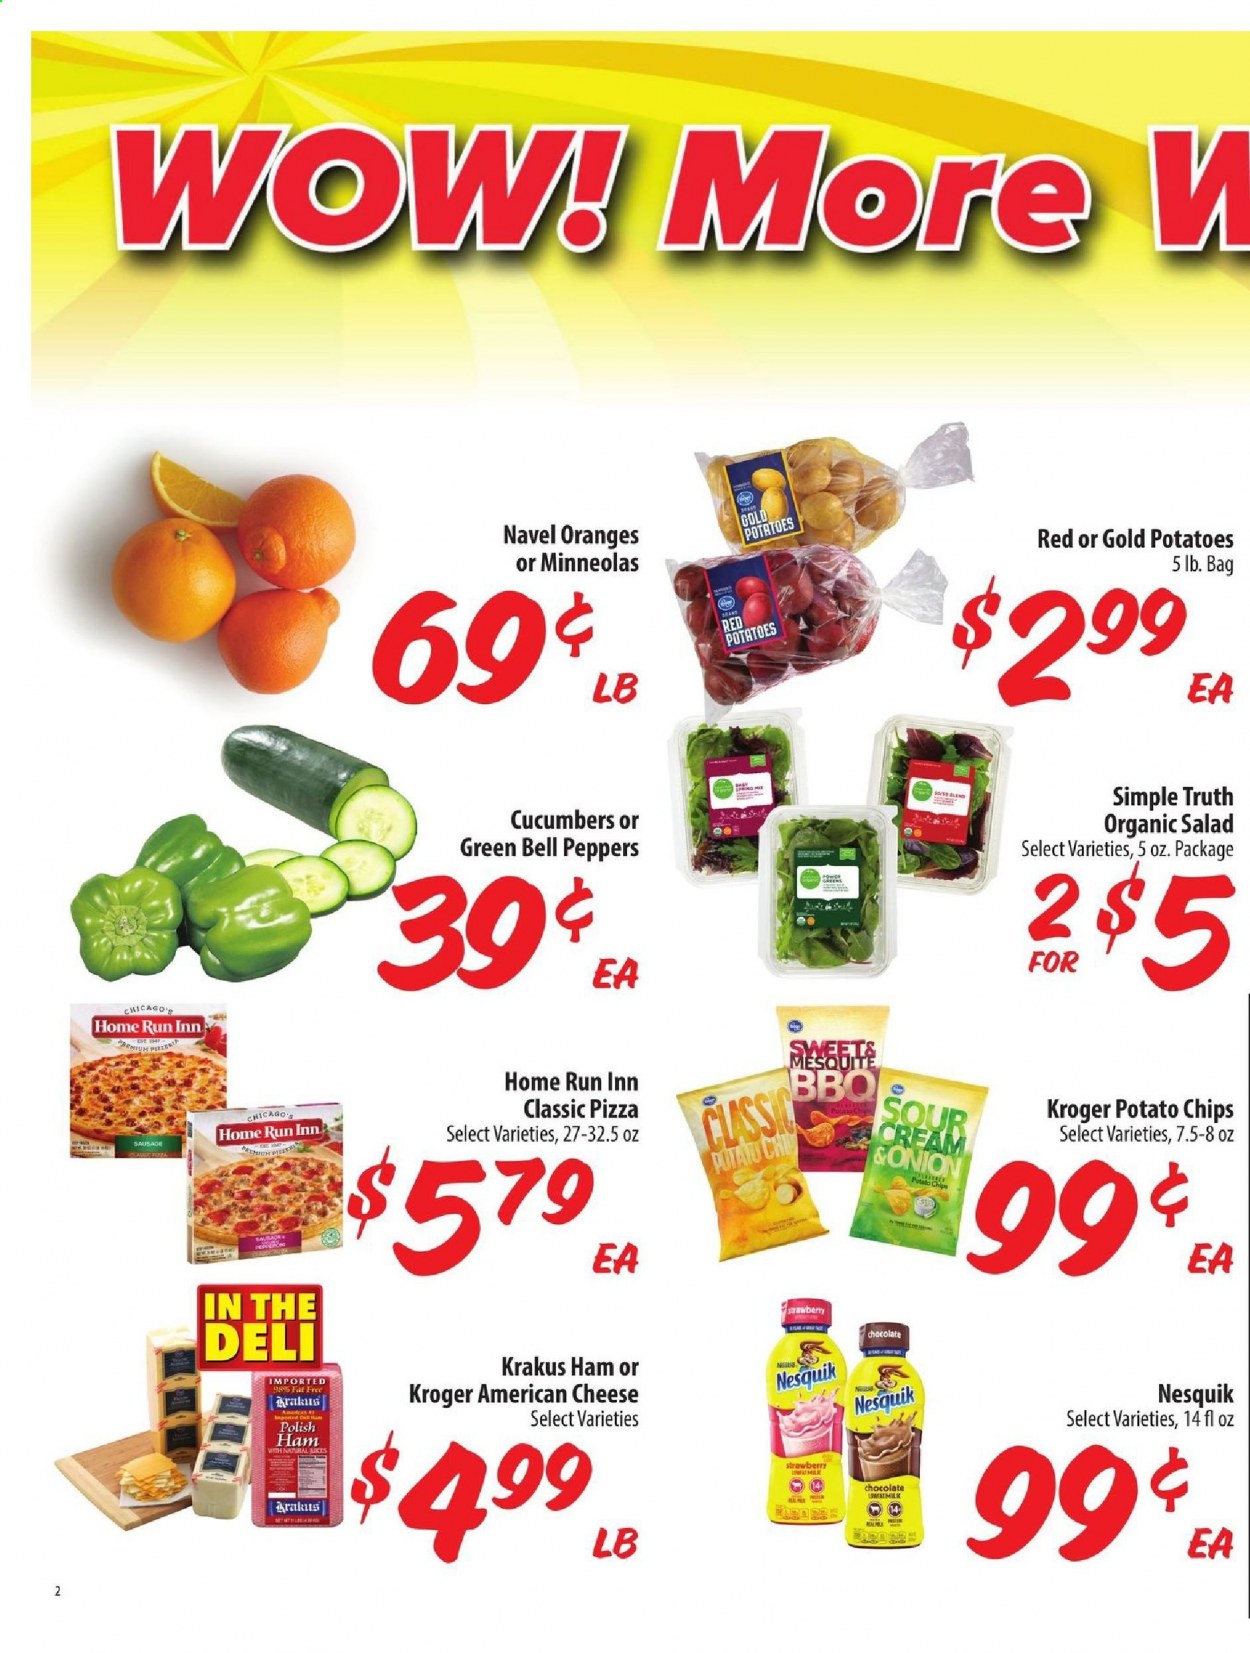 thumbnail - Food 4 Less Flyer - 04/07/2021 - 04/13/2021 - Sales products - bell peppers, cucumber, salad, oranges, pizza, ham, american cheese, chocolate, Nesquik, potato chips, chips, polish, peppers, red potatoes, navel oranges. Page 3.